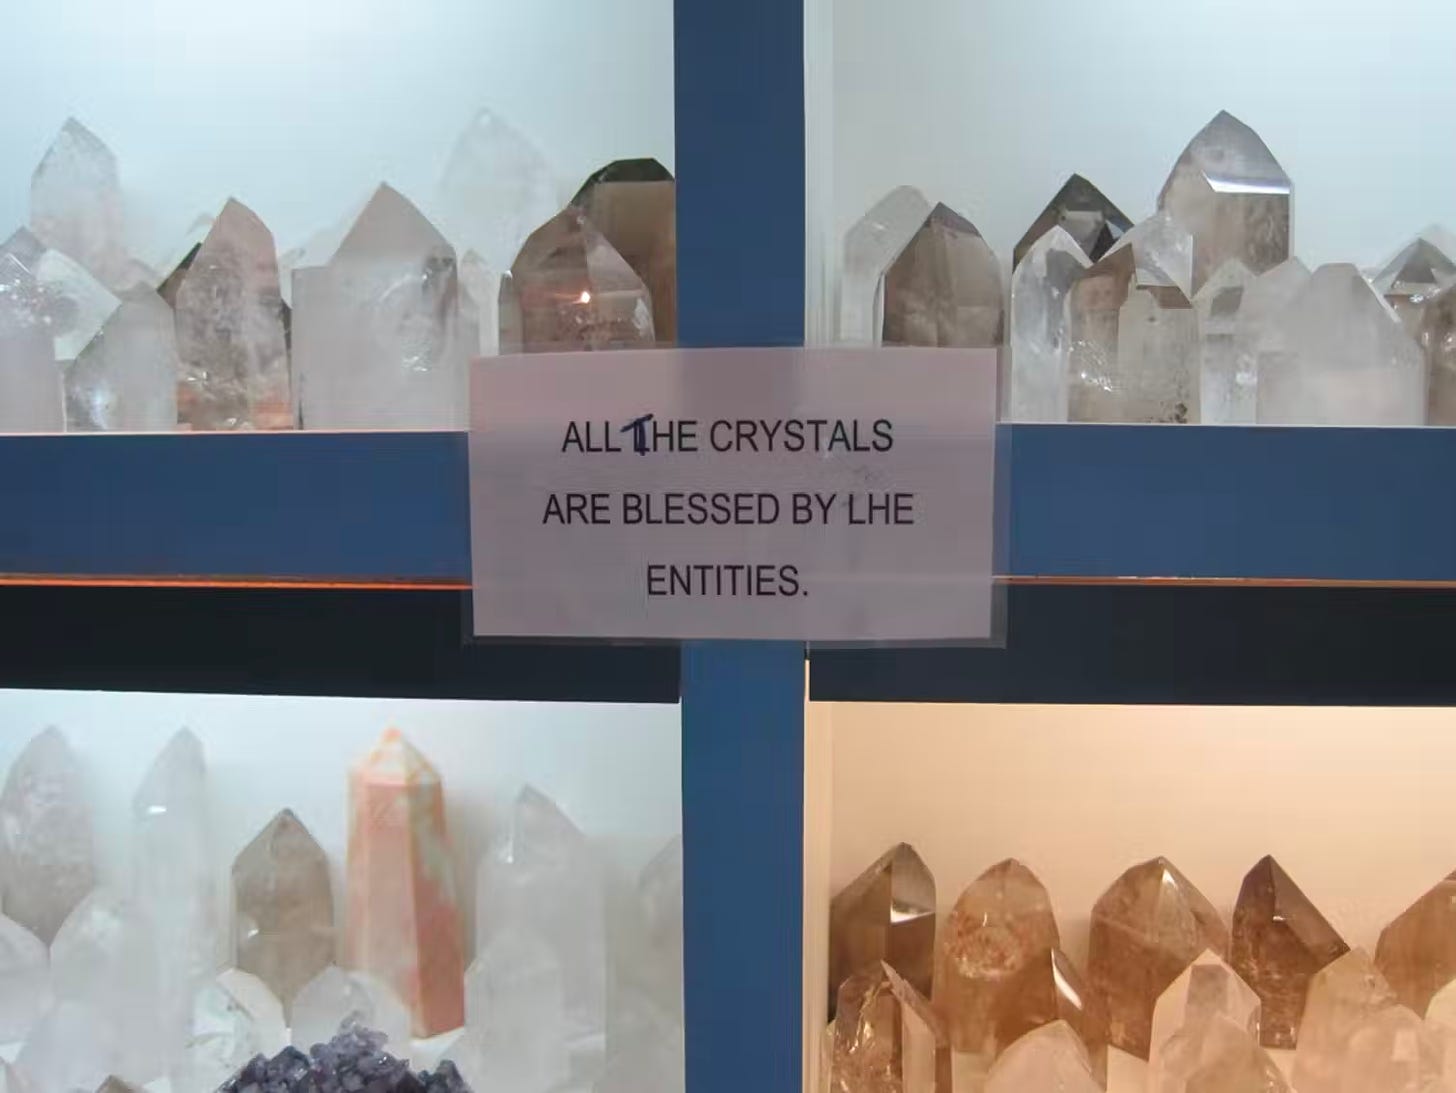 four different kinds of crystals behind a displace case, with a sign that says "All the crystals are blessed by LHE entities"